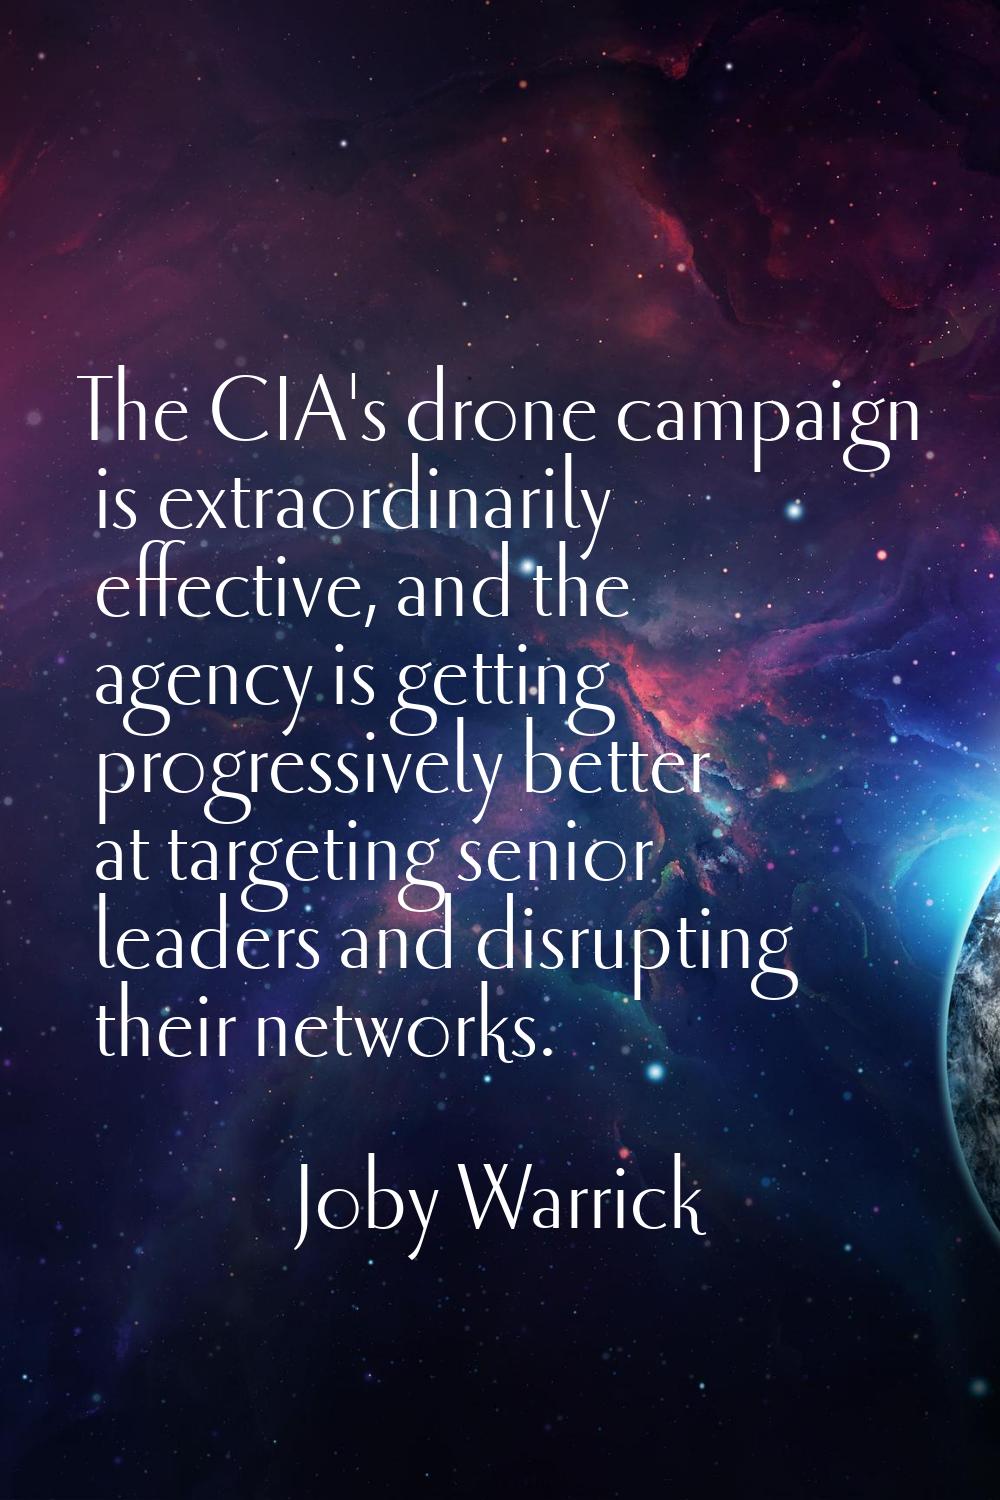 The CIA's drone campaign is extraordinarily effective, and the agency is getting progressively bett